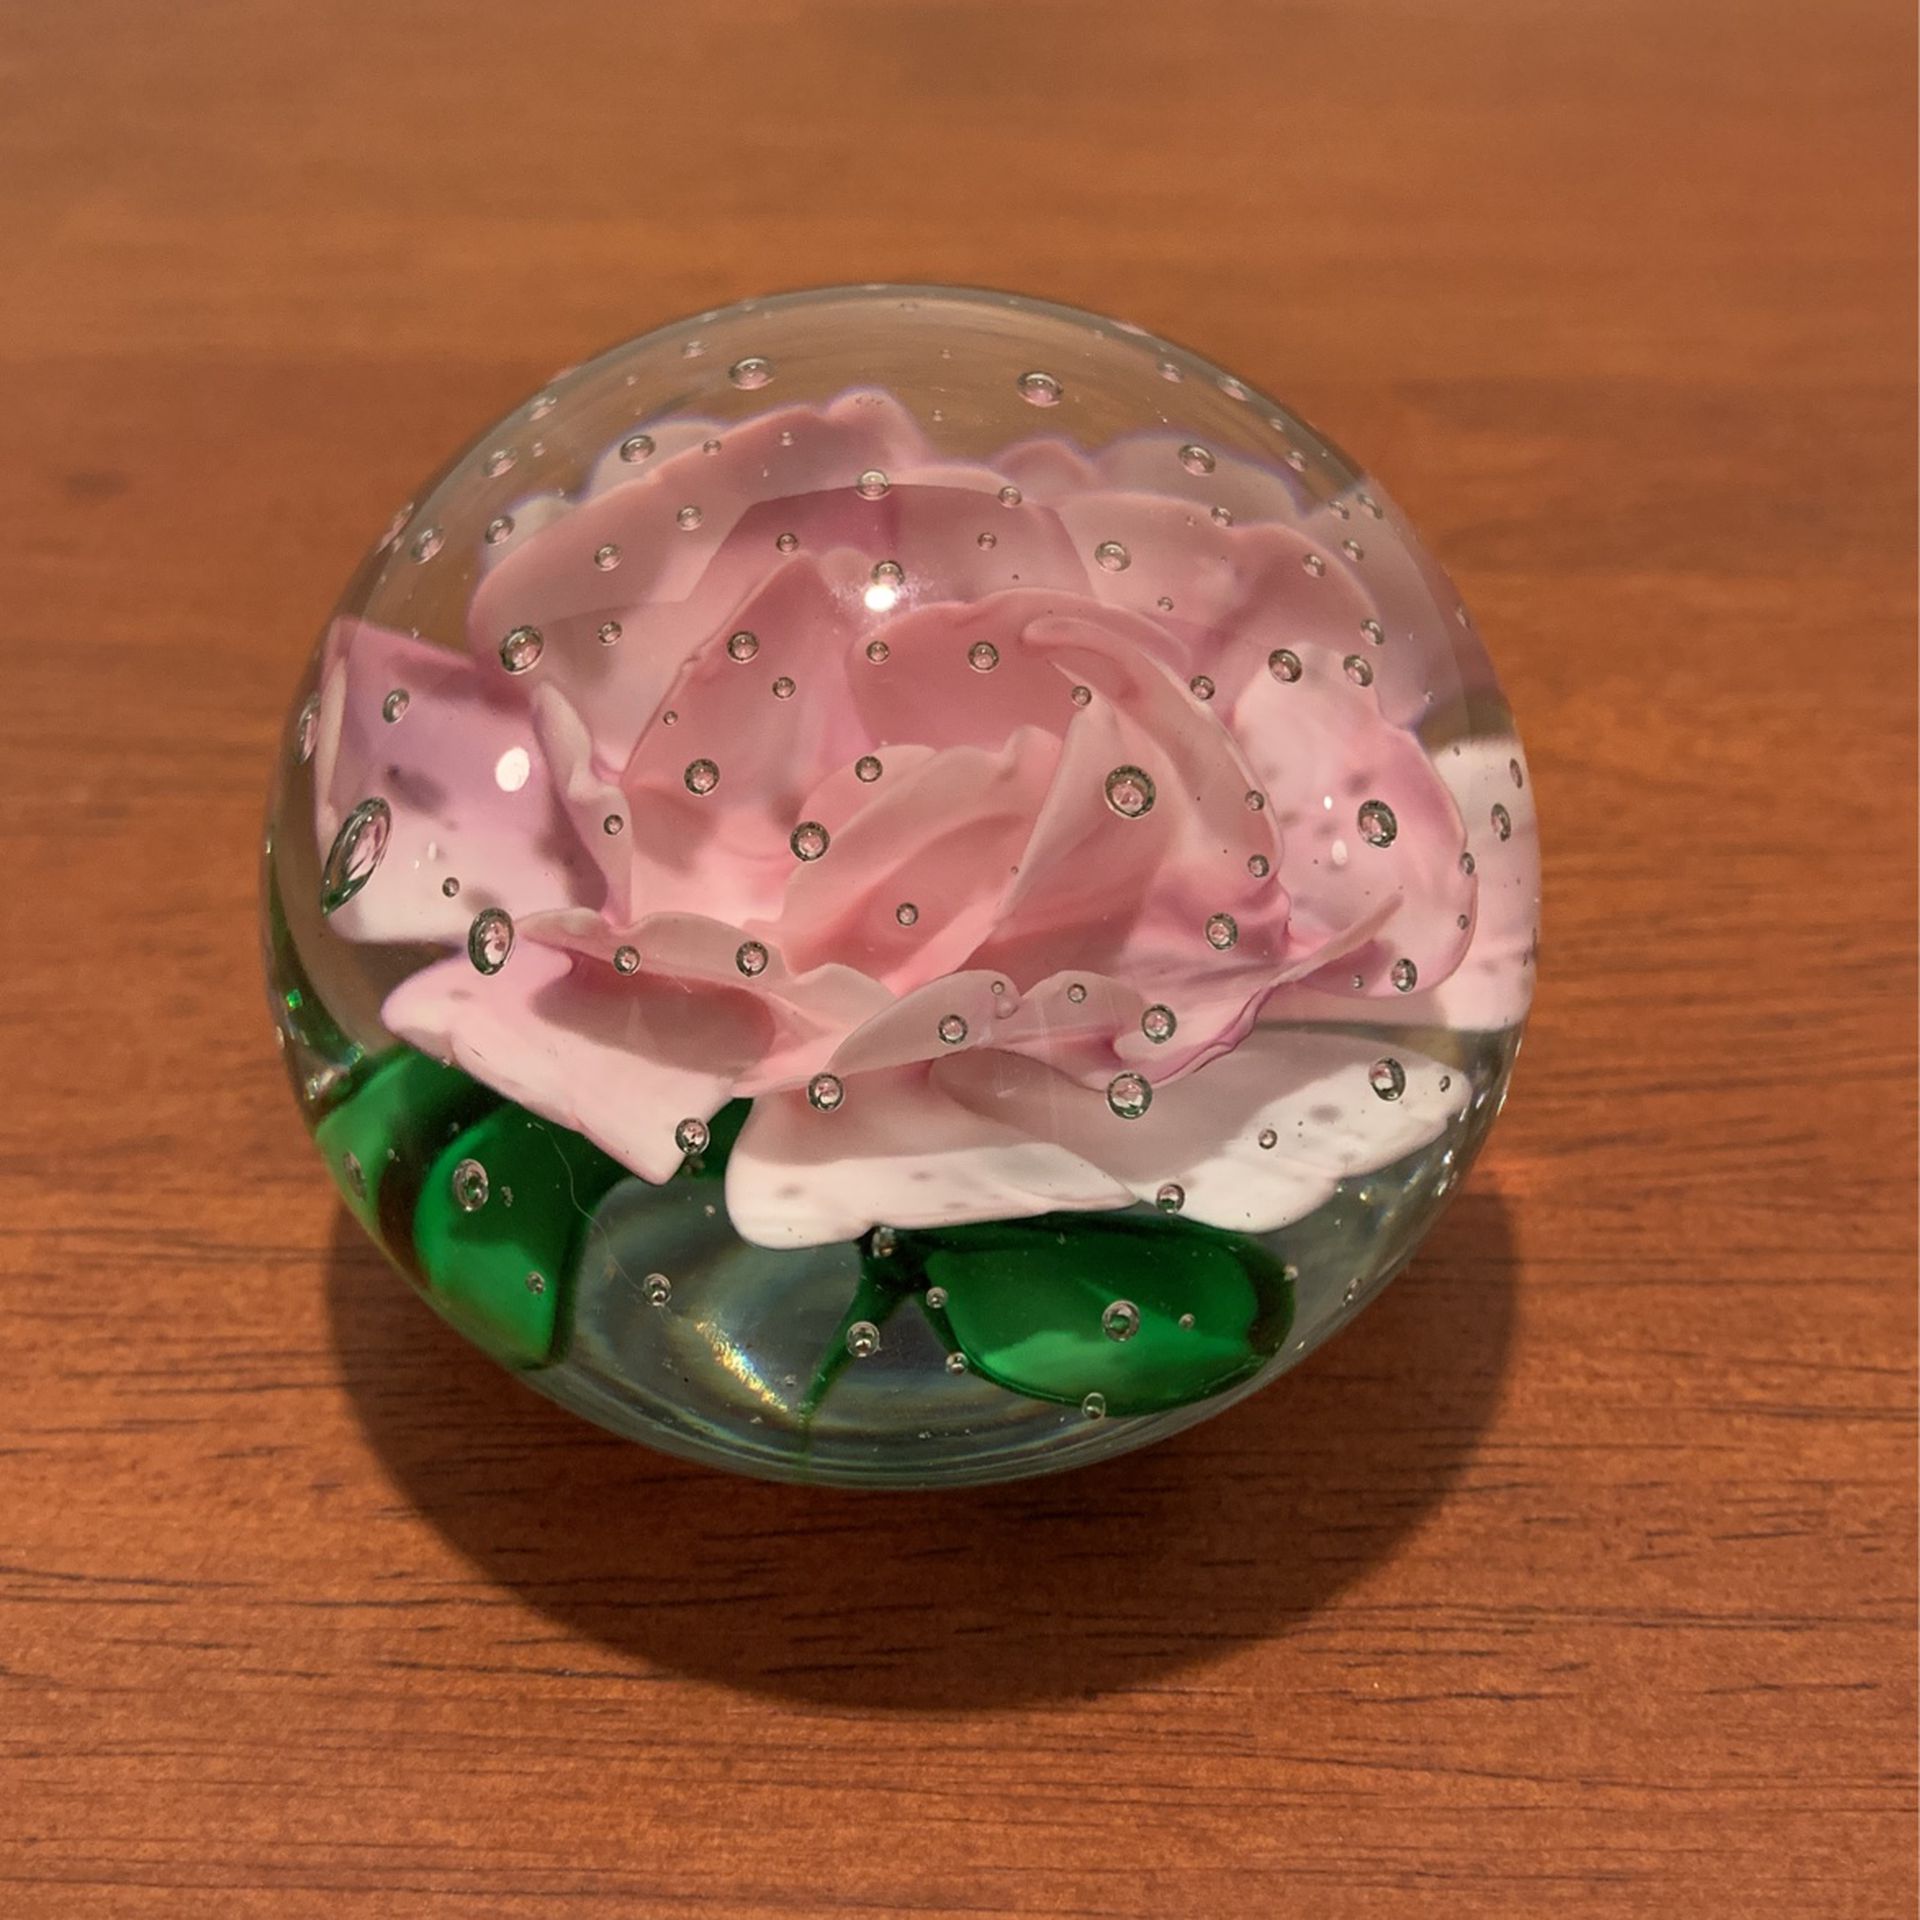 Rose Glass Paperweight With Controlled Bubbles 3 1/2”x2” B32